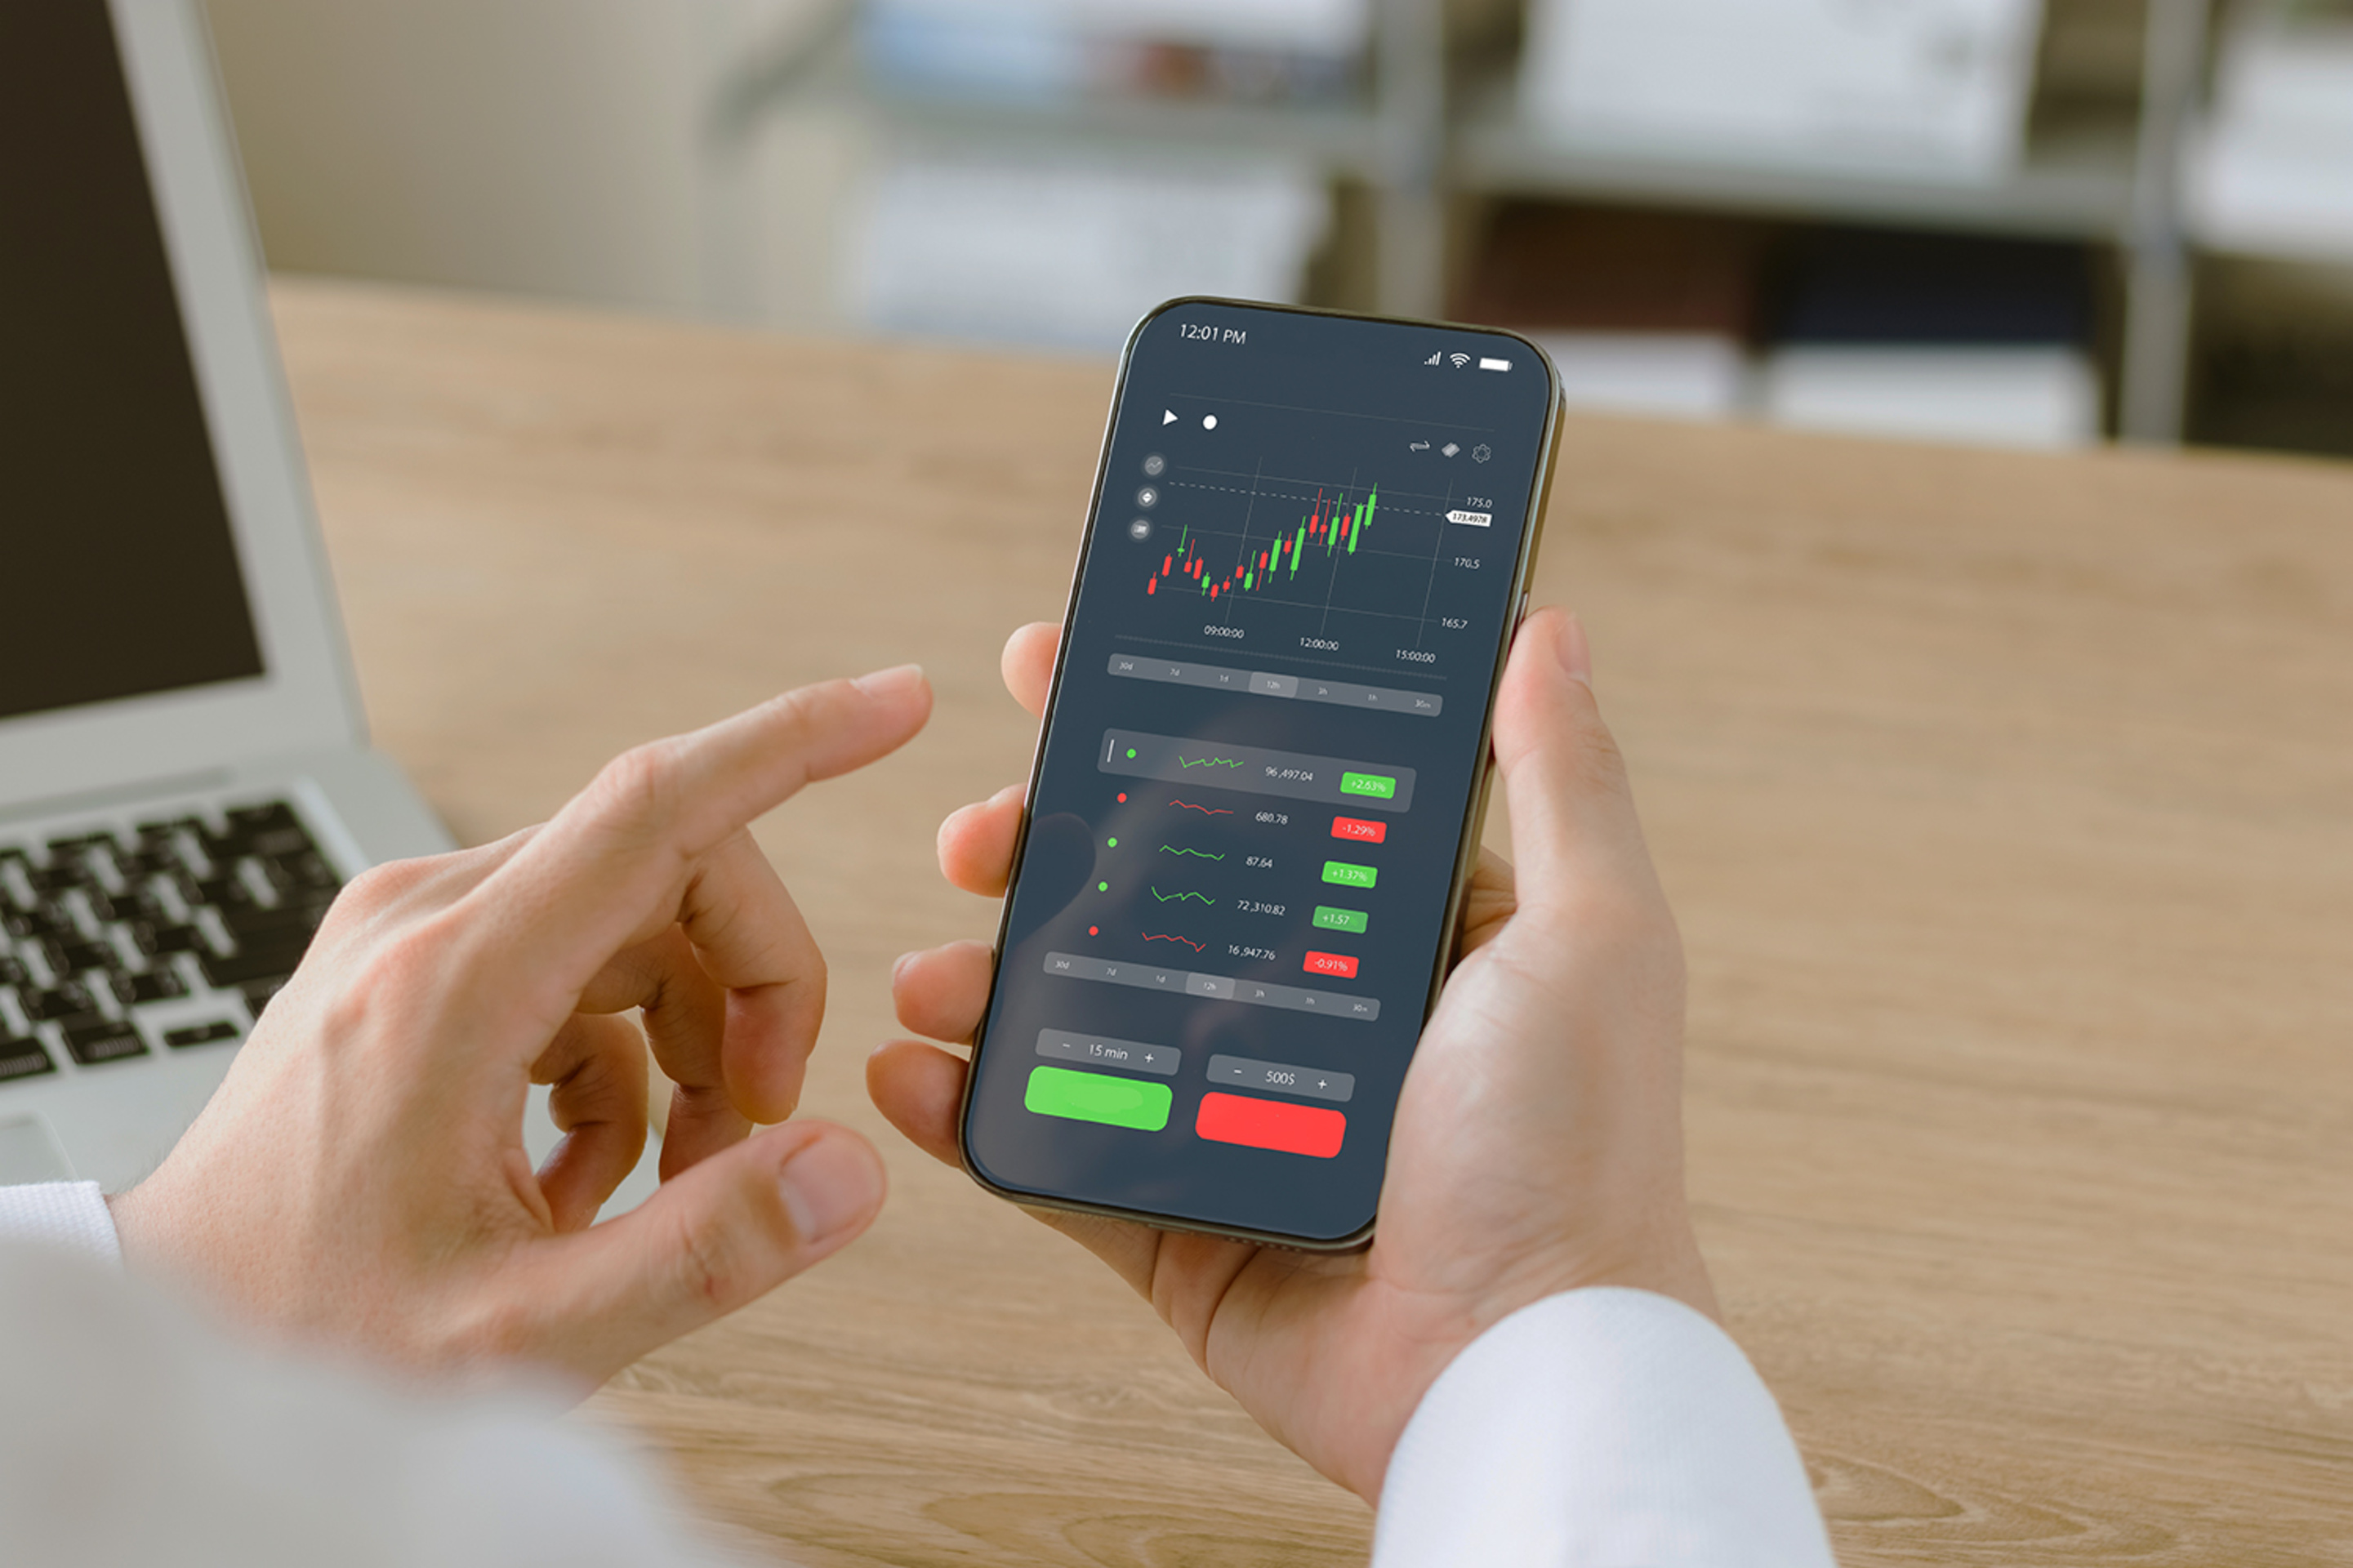 Businessmen work with stock market investments using smartphones to analyze trading data. smartphone with stock exchange graph on screen. Financial stock market